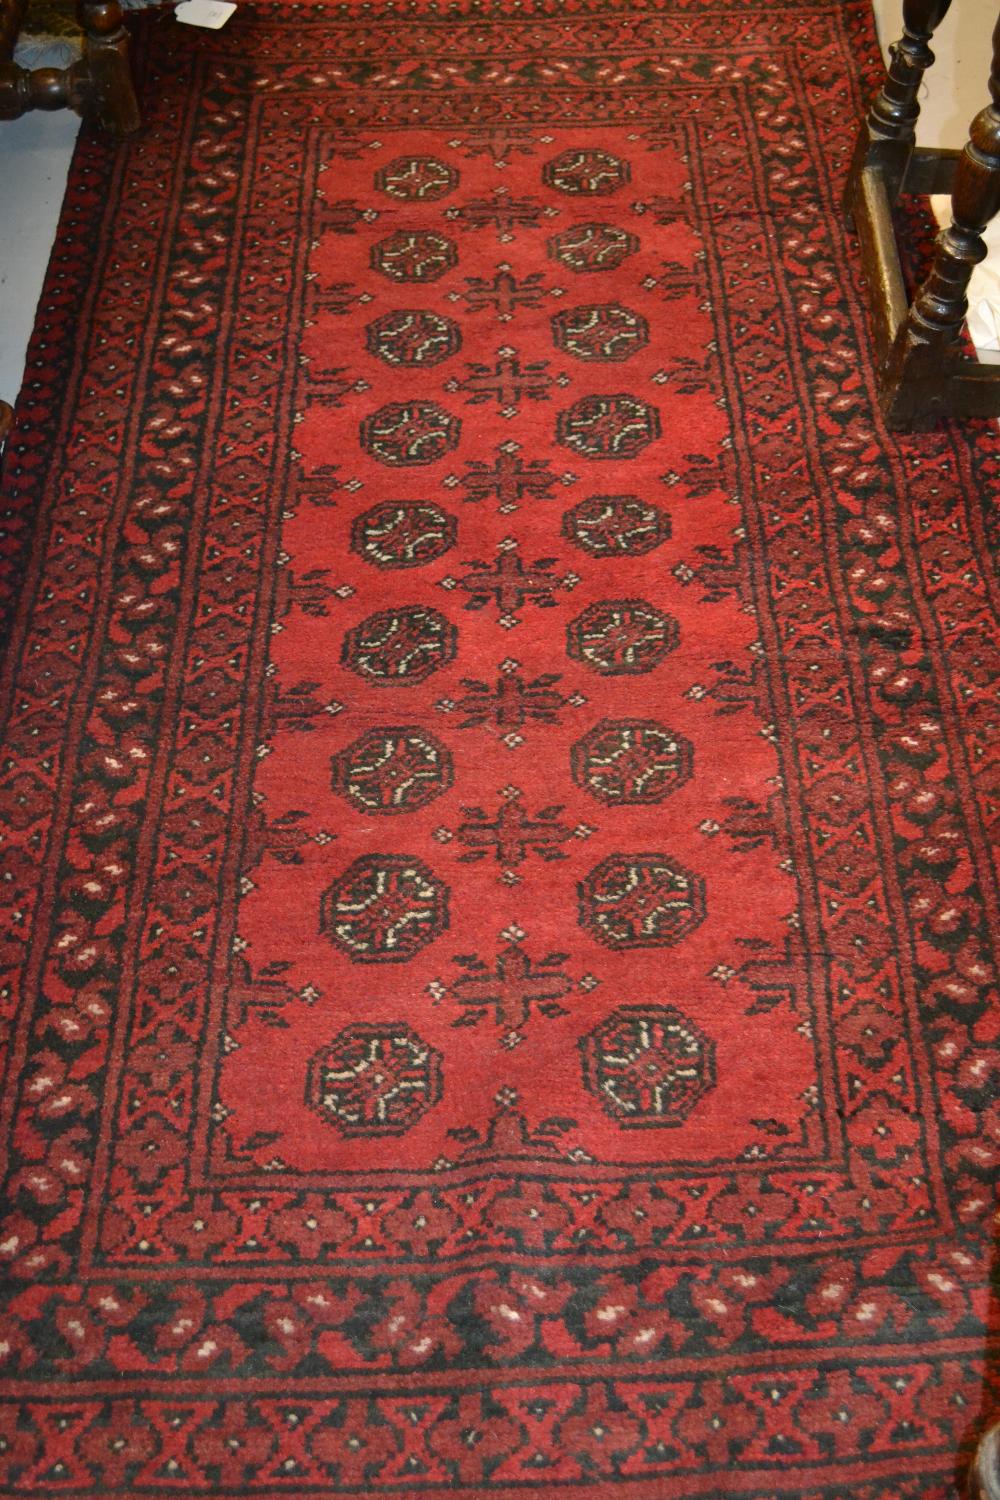 Afghan style rug having red ground, 1.92m x 1.